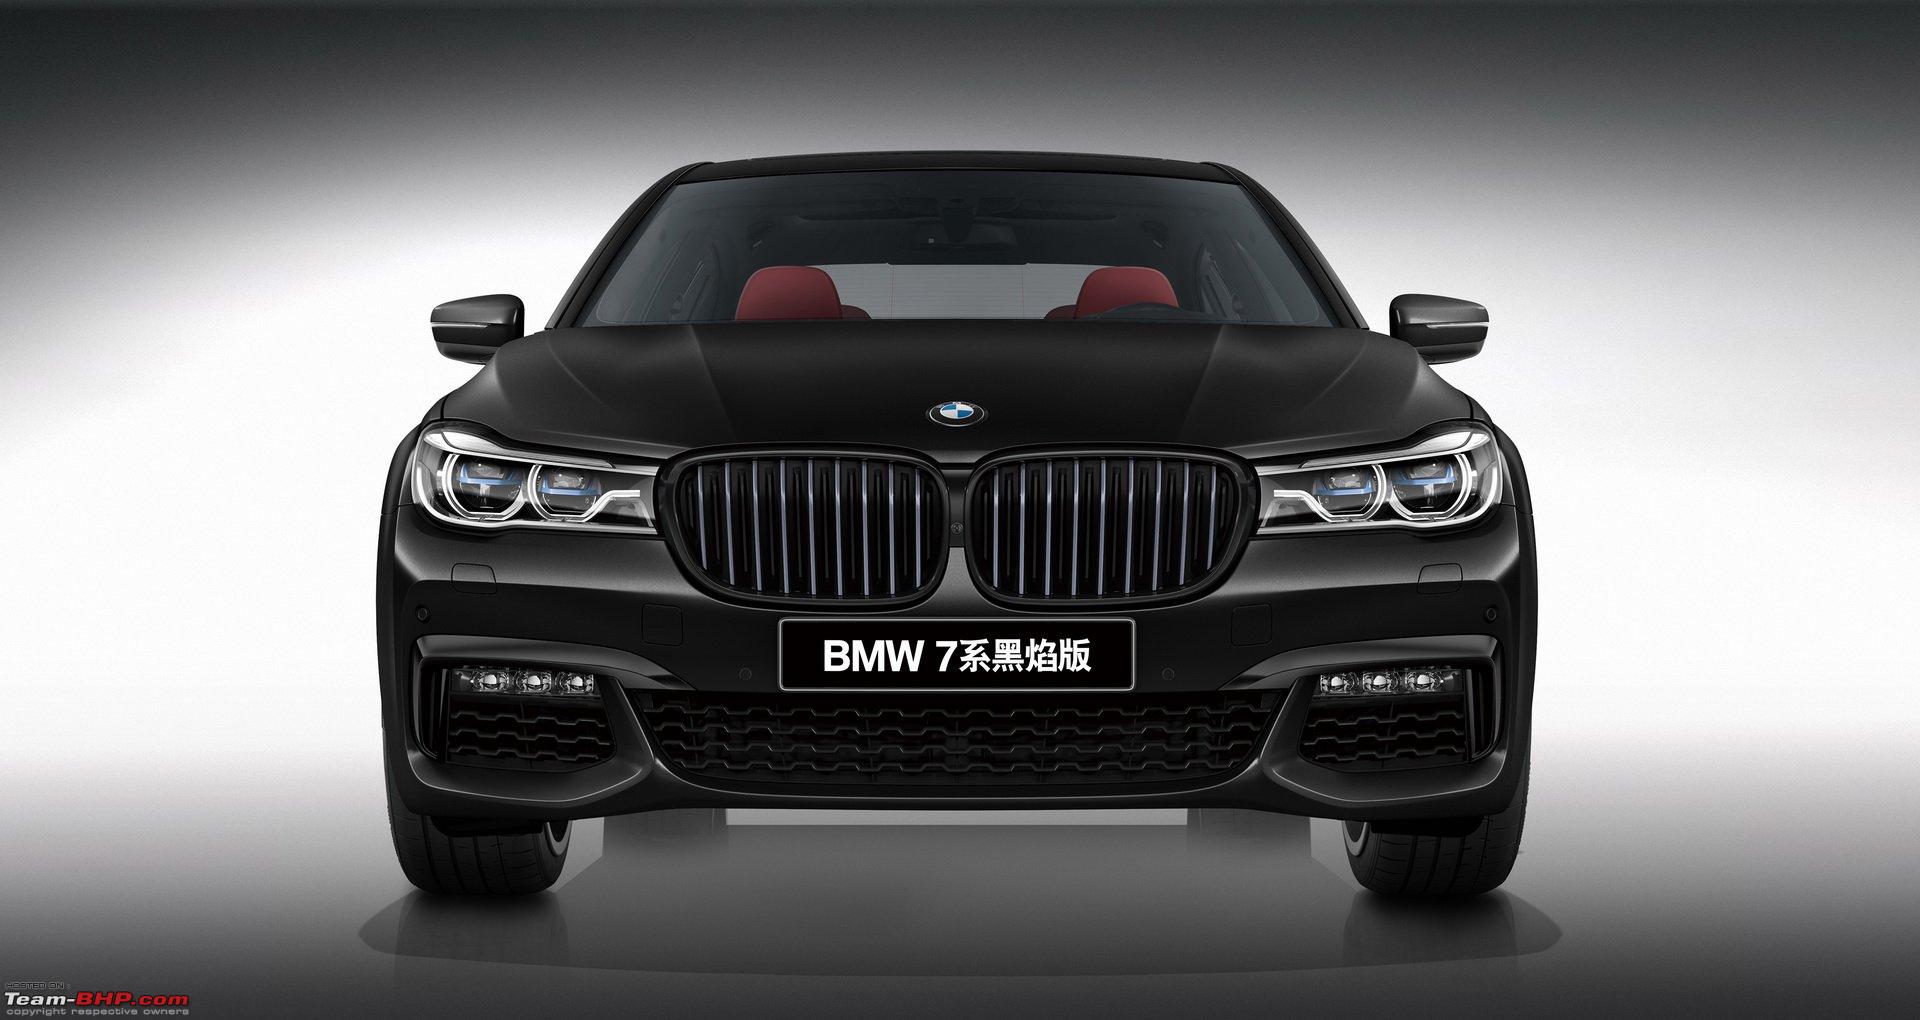 2019 BMW 7-Series Facelift - Page 4 - Team-BHP